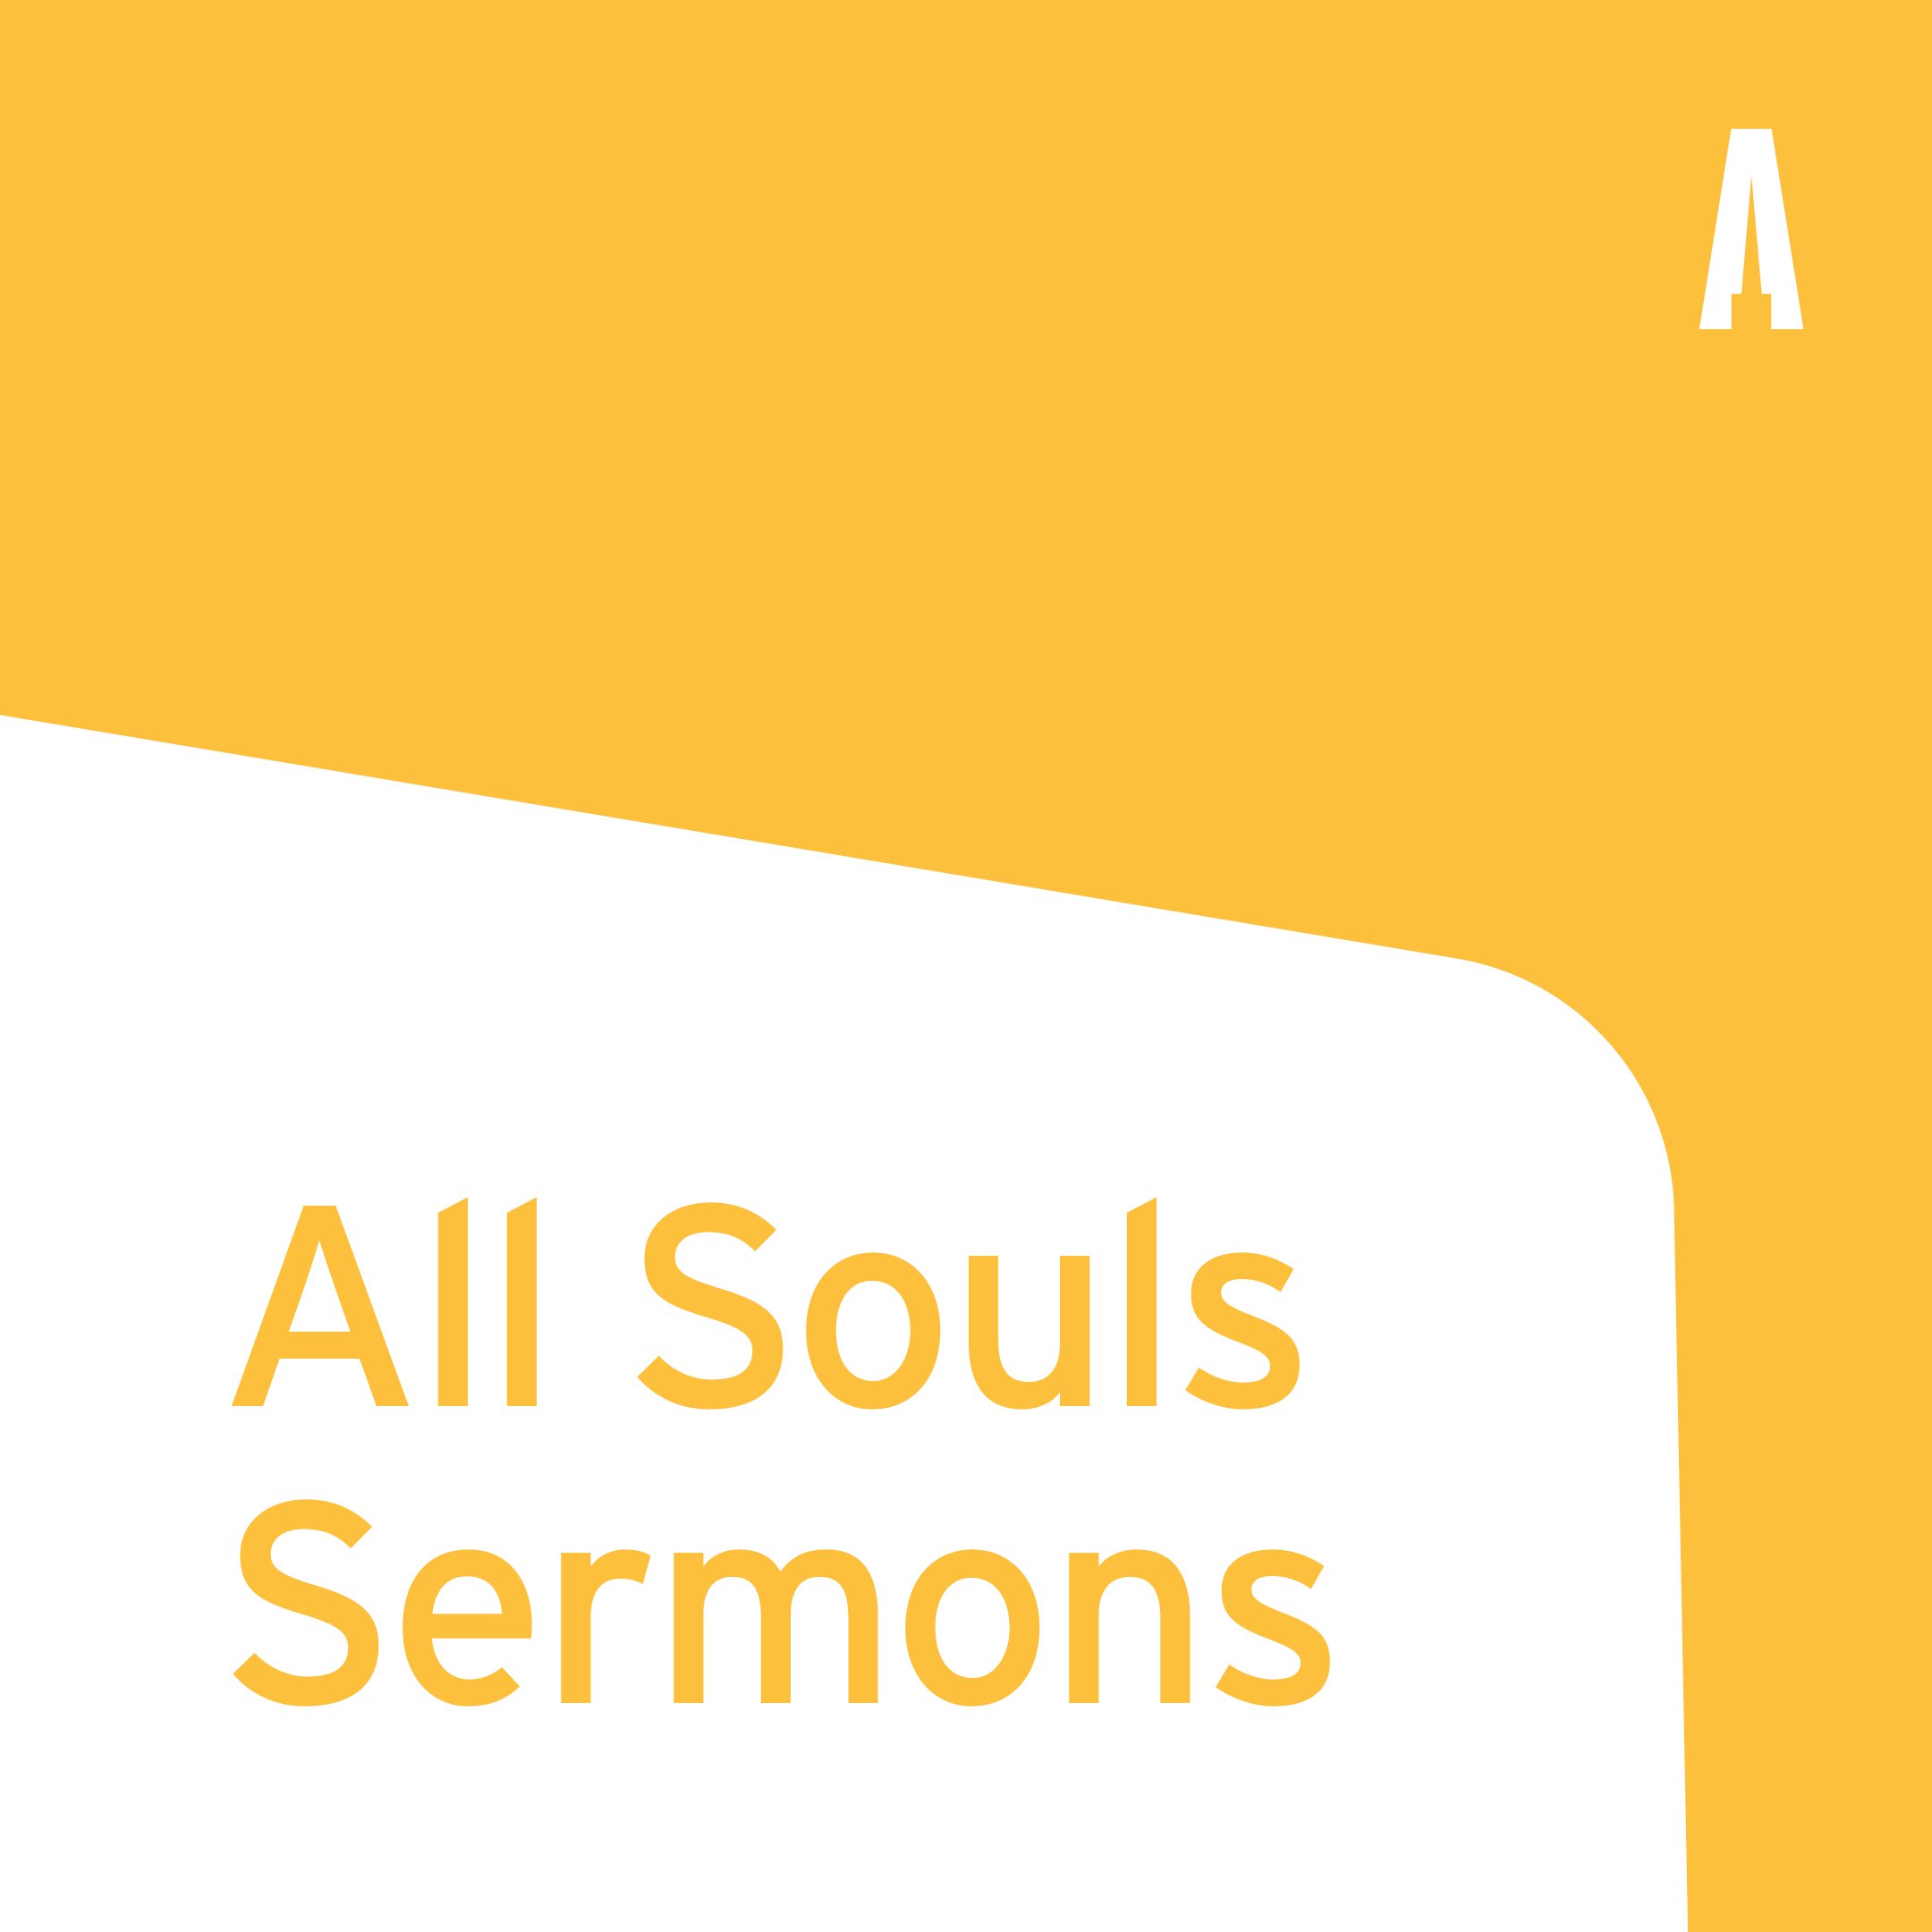 What does God think of All Souls?